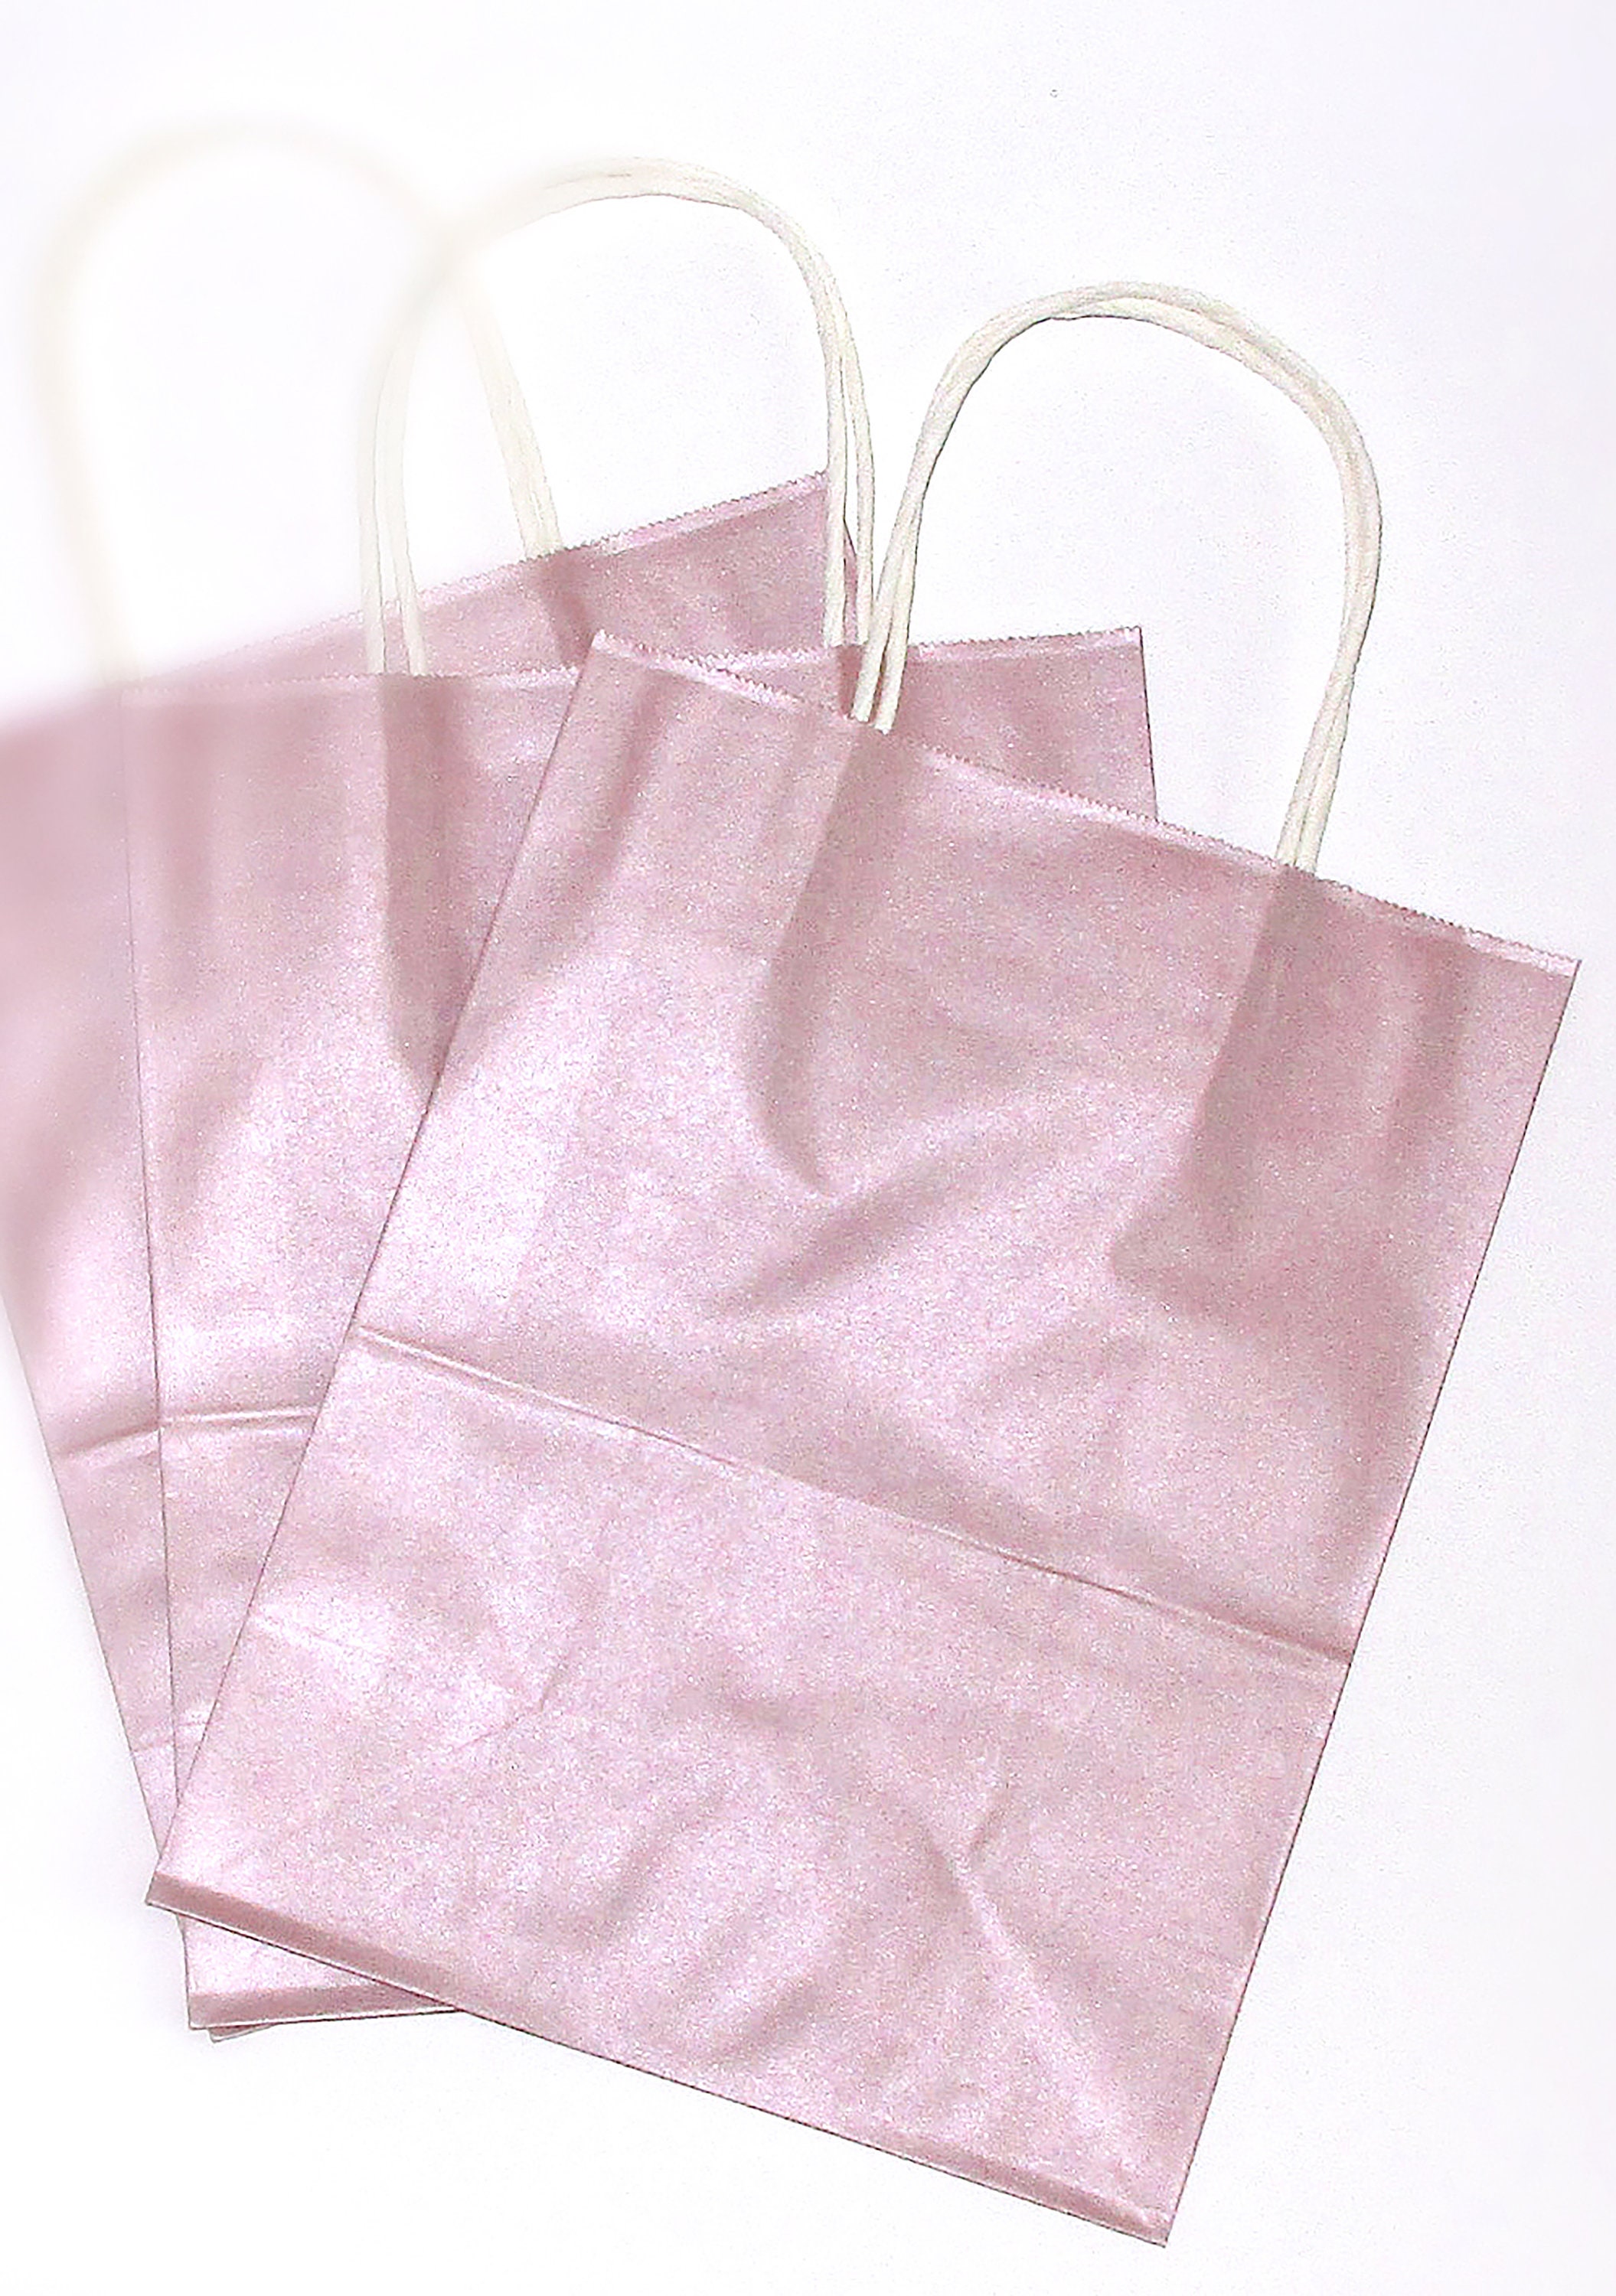 Pink Gift Bags Medium Size 12 Pack. Paper Gift Bags with Handles for Birthdays, Shower, Wedding, Shopping, Events, Treats, Business Tchotchkes, Retail